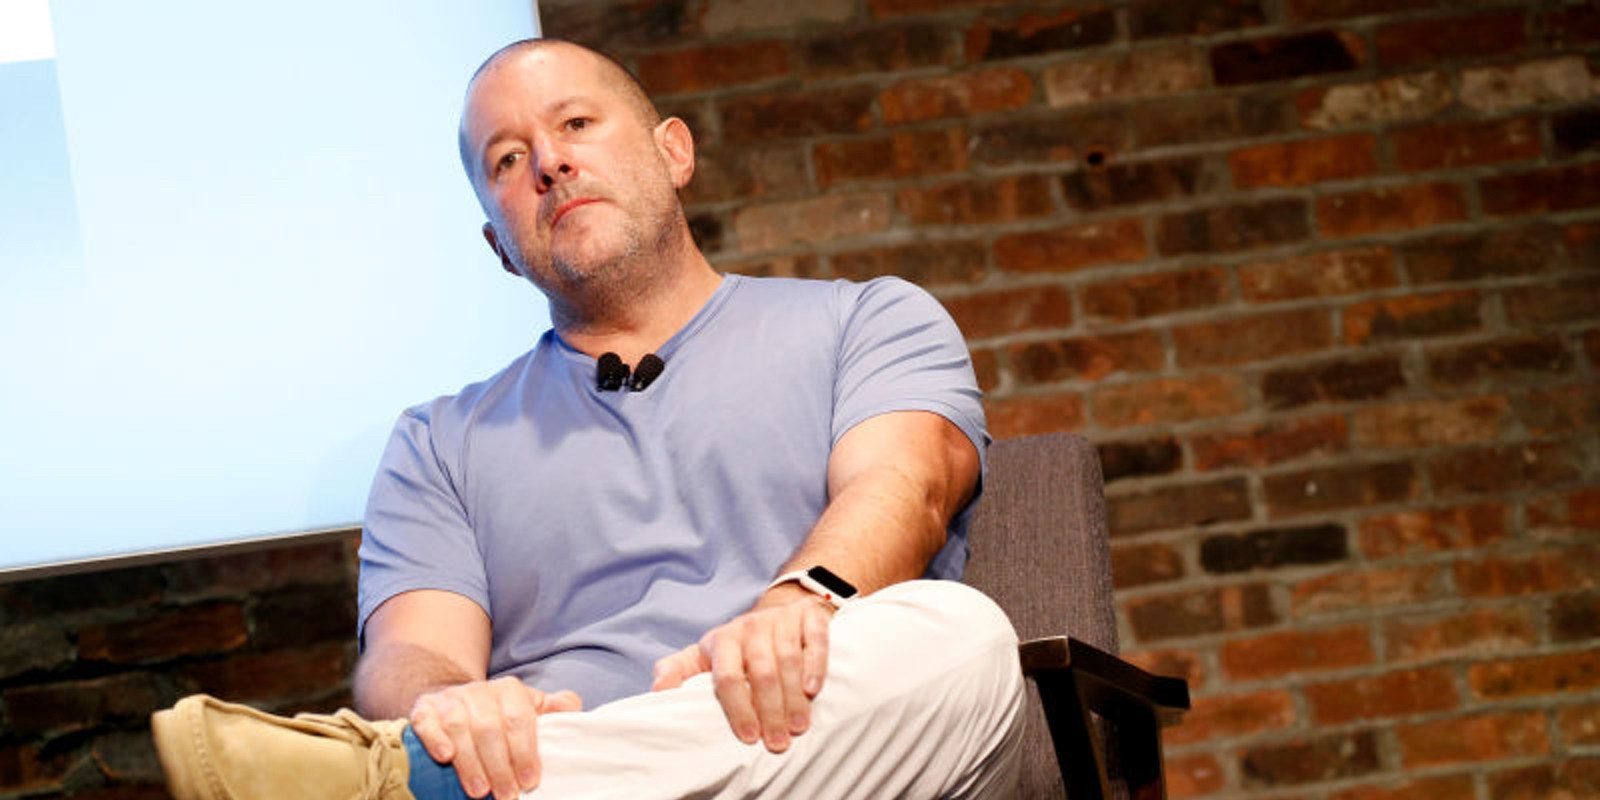 WSJ: Jony Ive Became 'Dispirited' After Apple Watch and Sometimes Failed to Show Up to Meetings